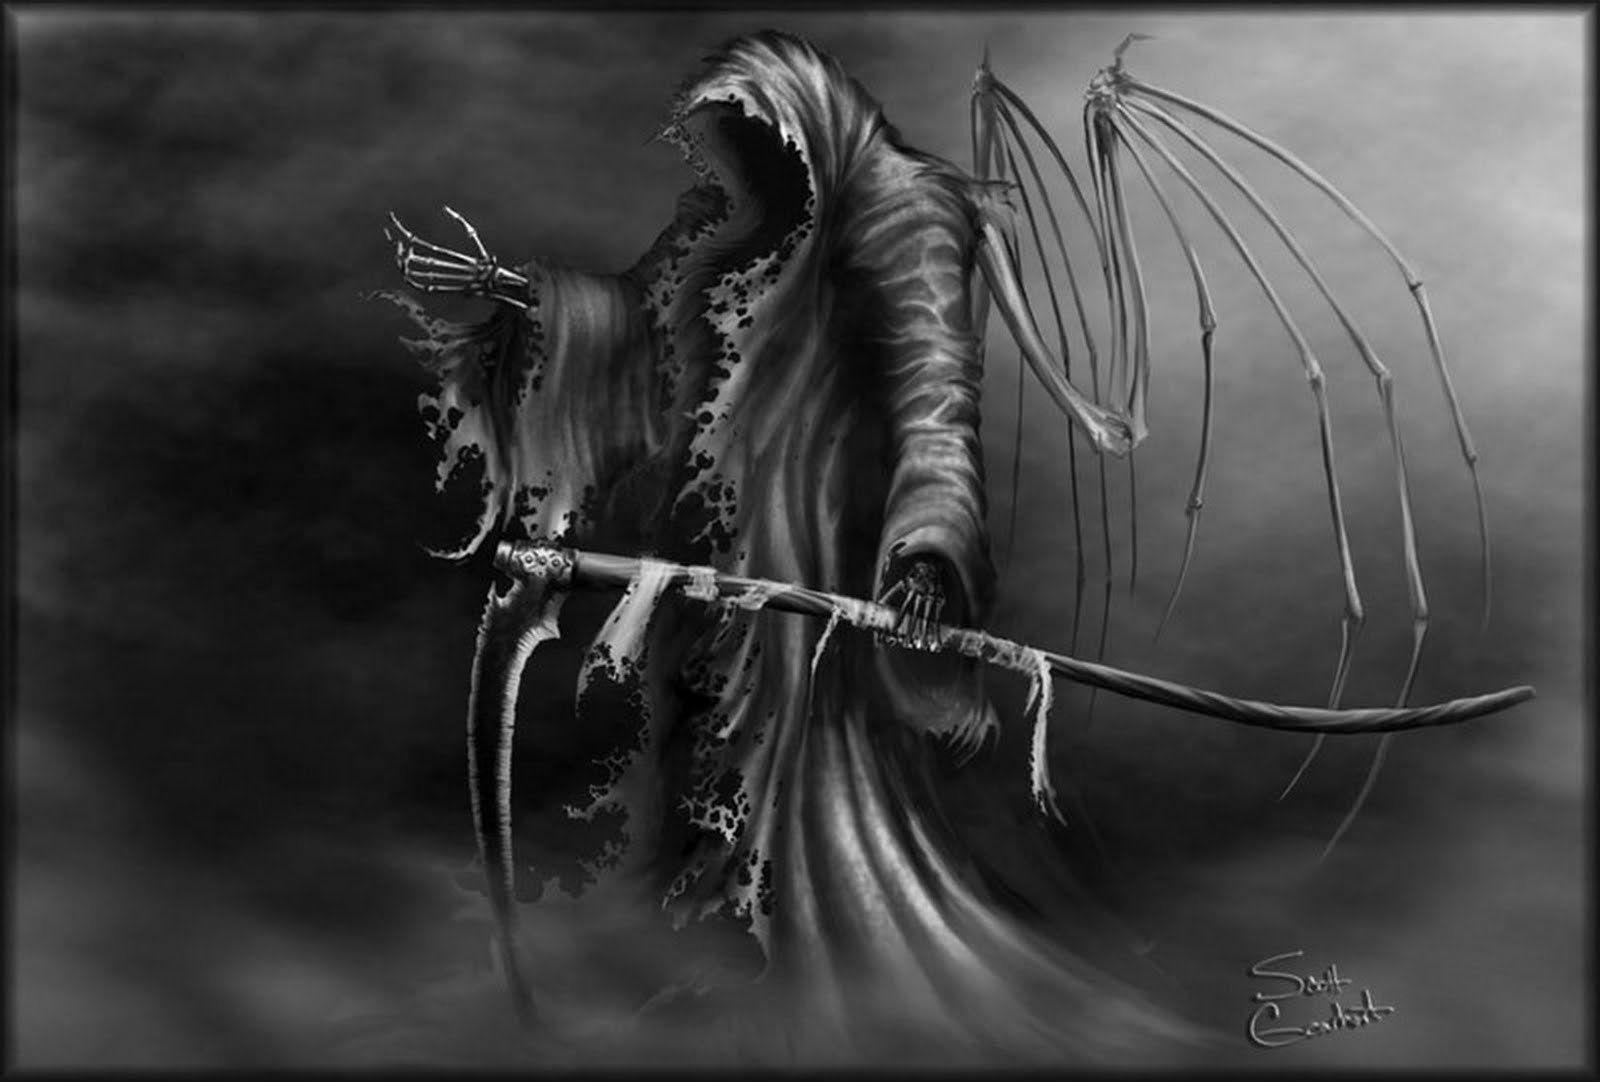 Grim Reaper HD Wallpaper and Background Image